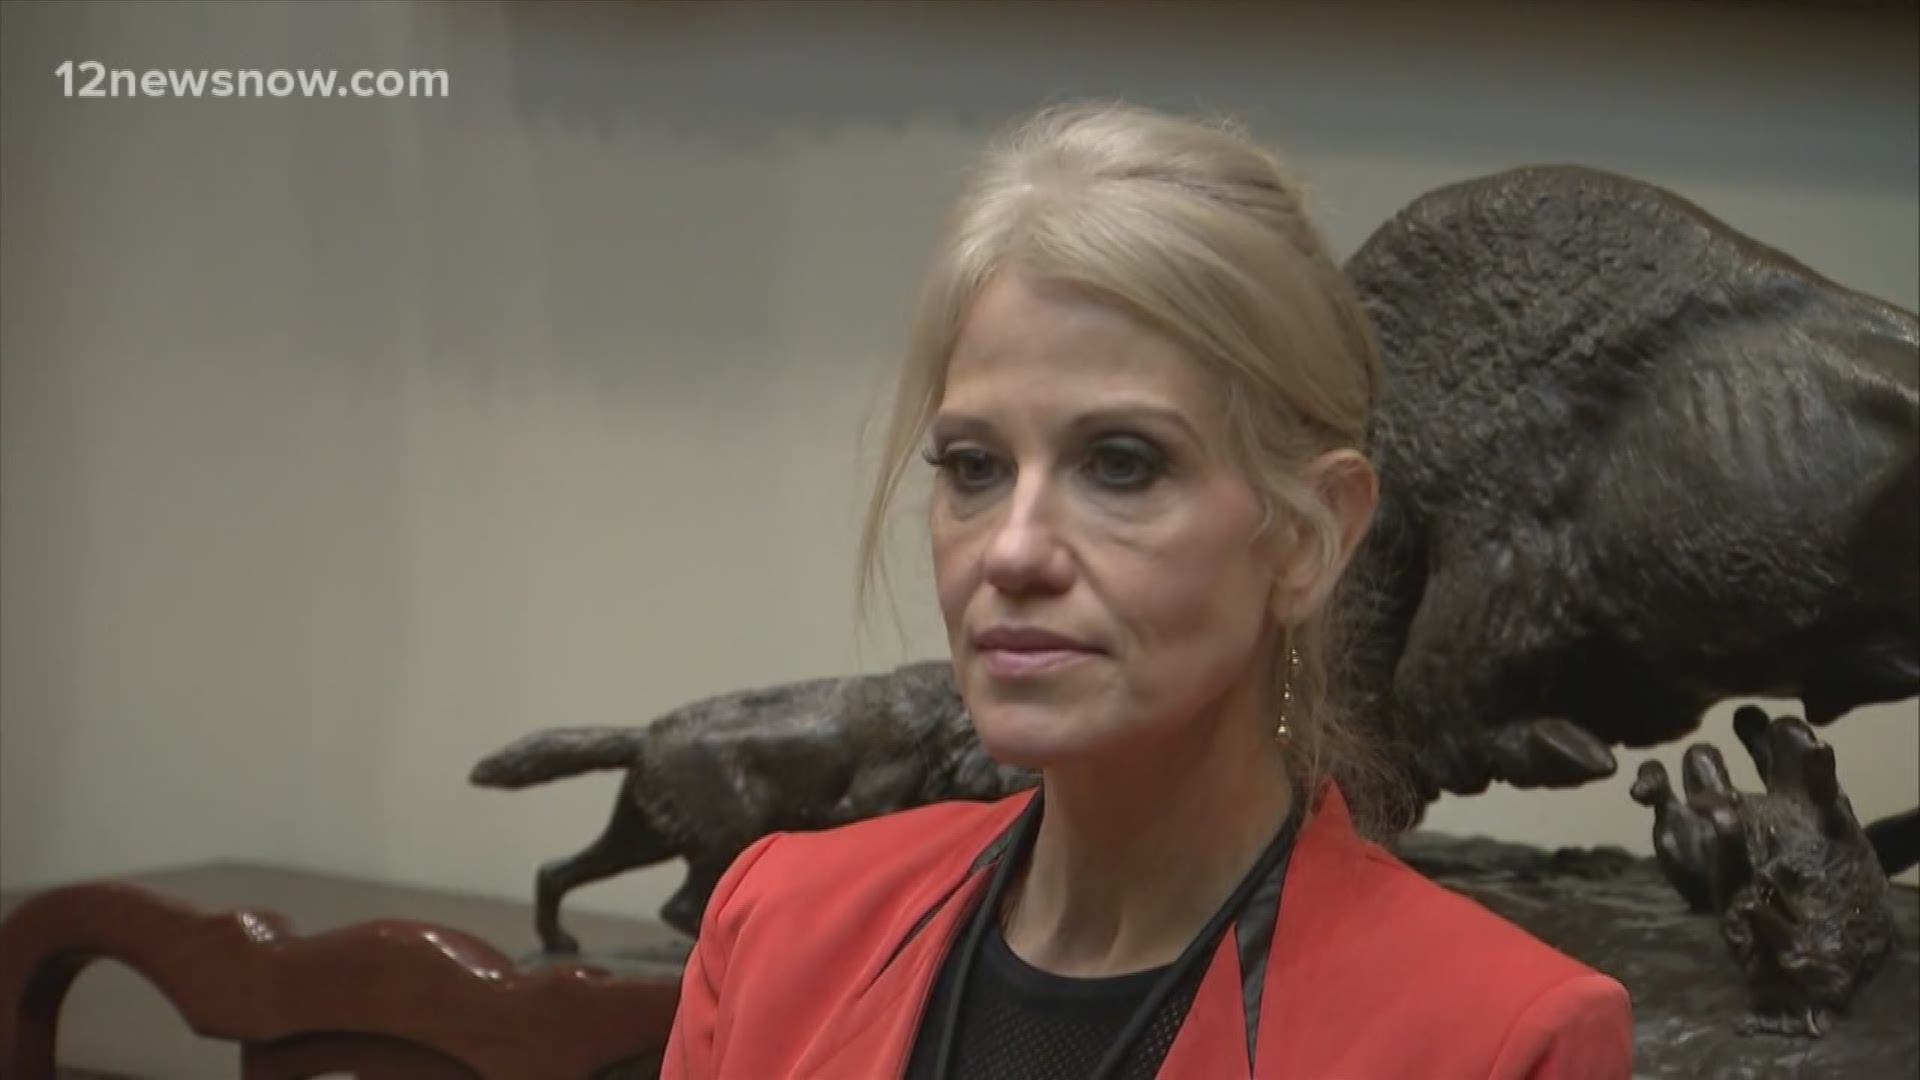 The office of special counsel said Conway repeatedly violated the 'Hatch Act' banning executive employees from using their platform for political activity.